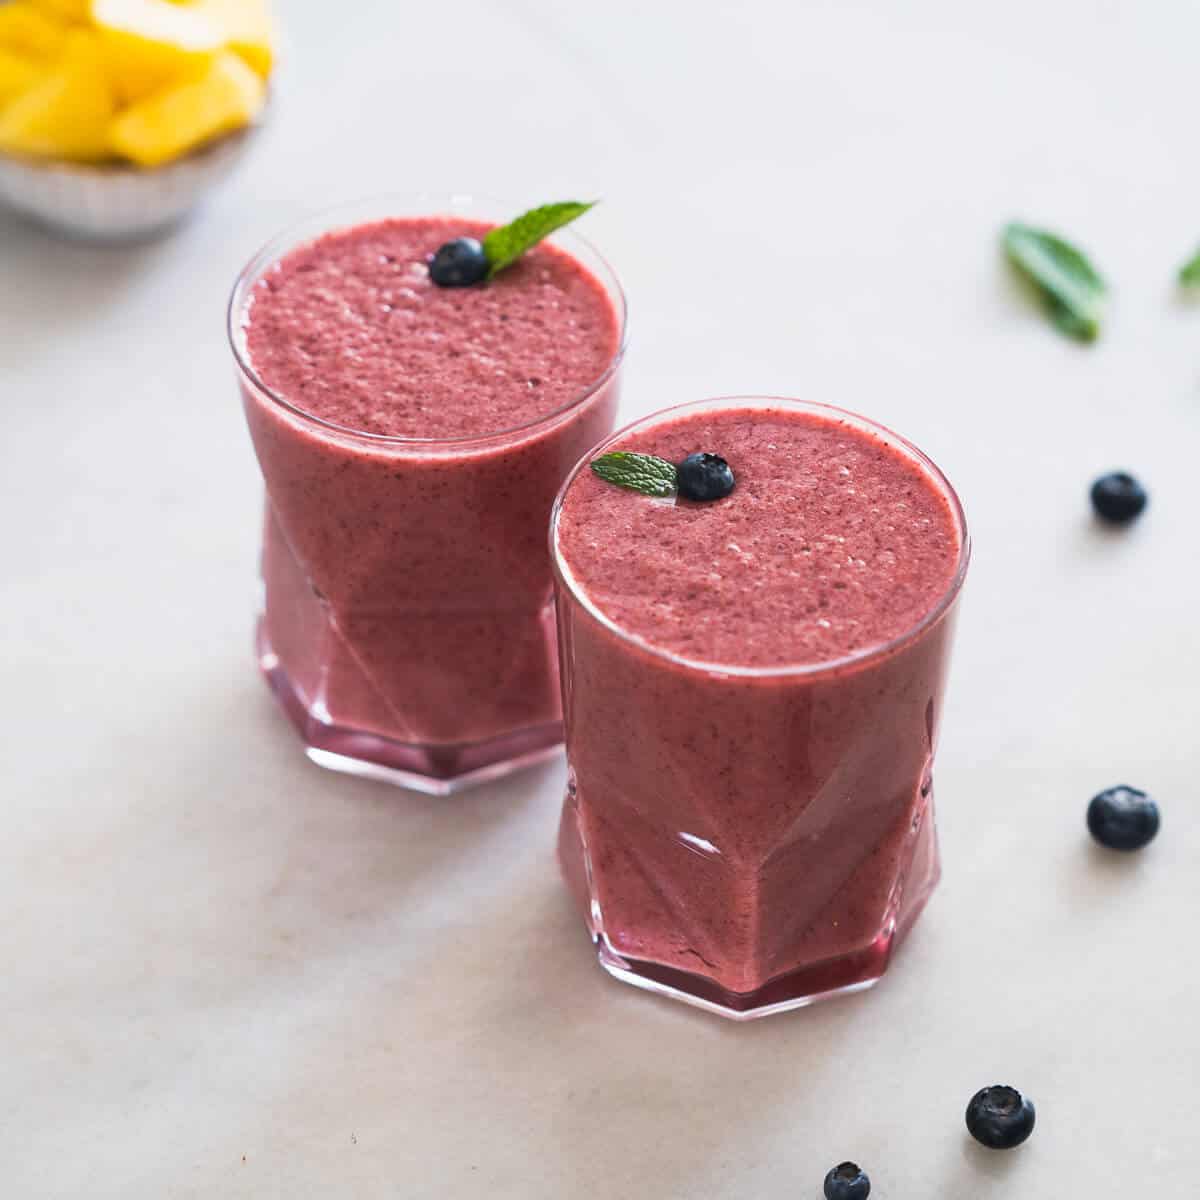 Blueberry Pineapple Smoothie without Banana (3 ingredients!)